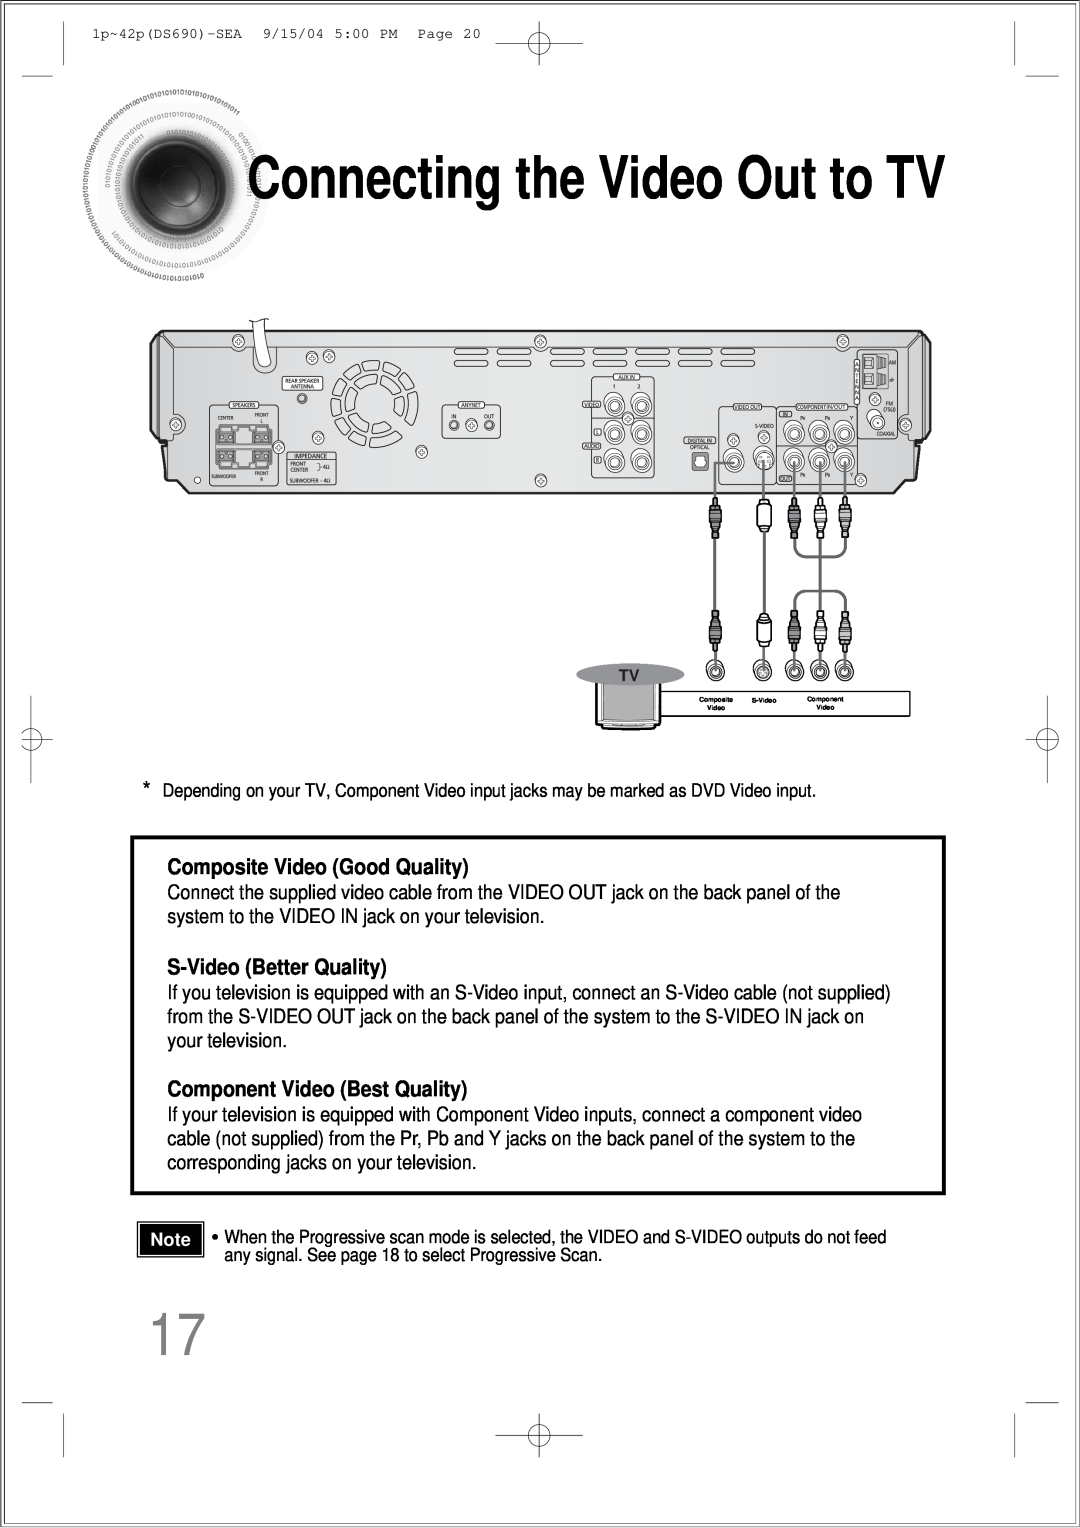 Samsung HT-DS690 instruction manual Connectingthe Video Out to TV, Composite Video Good Quality, S-VideoBetter Quality 